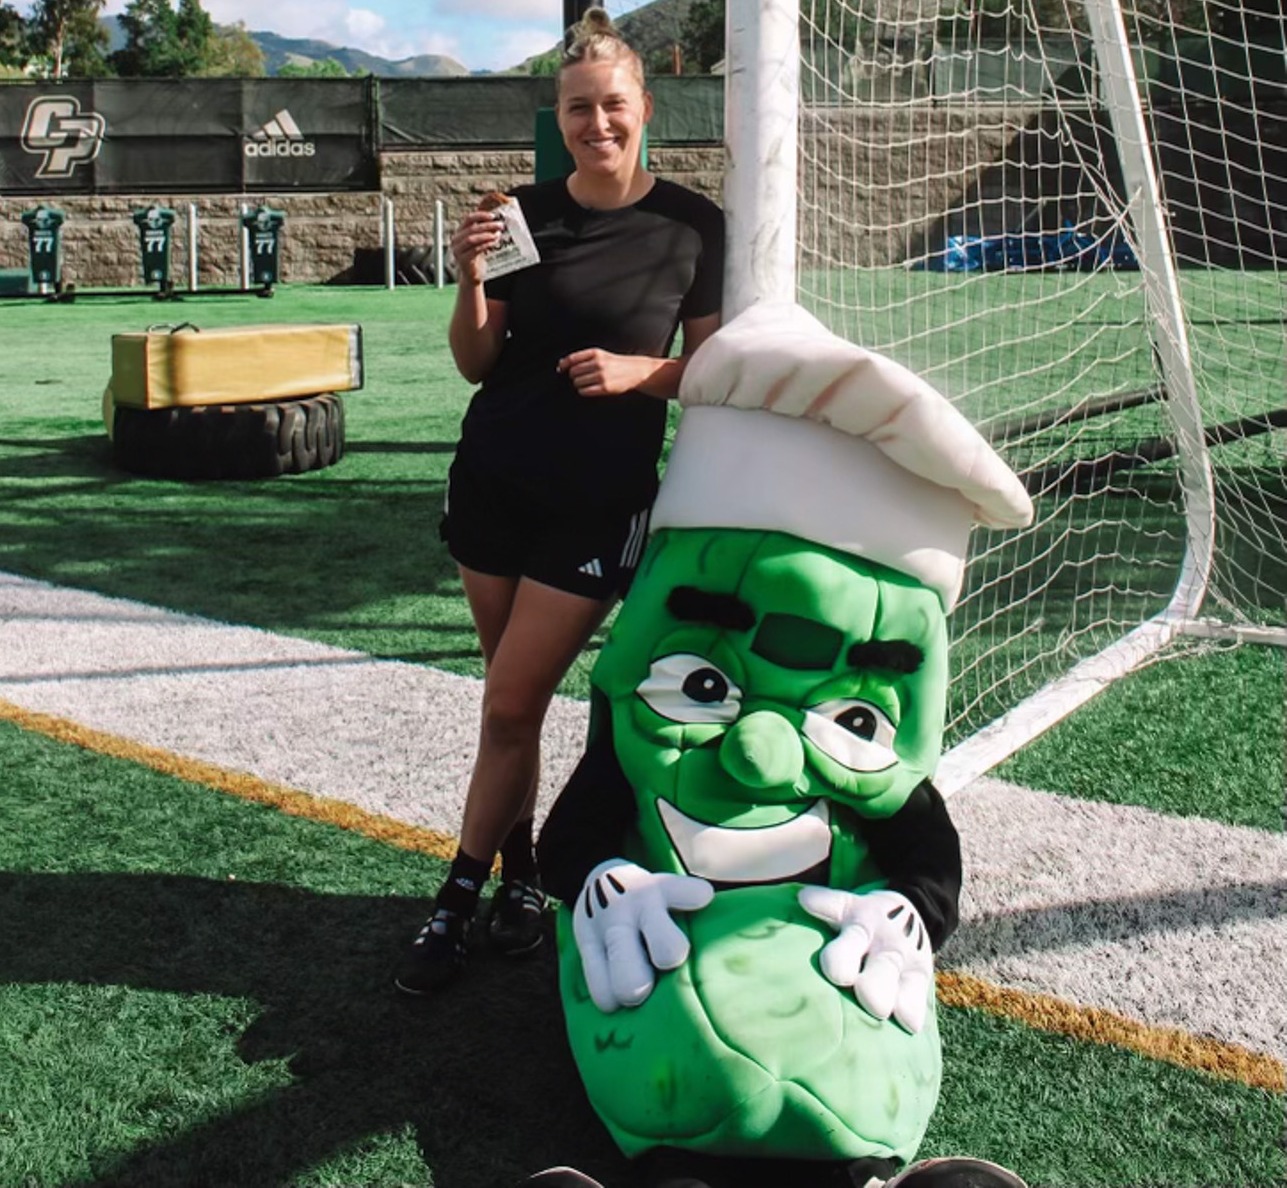 Mac Samuel poses with a pickle mascot during a promotional video shoot for Mr. Pickle's Sandwich Shop